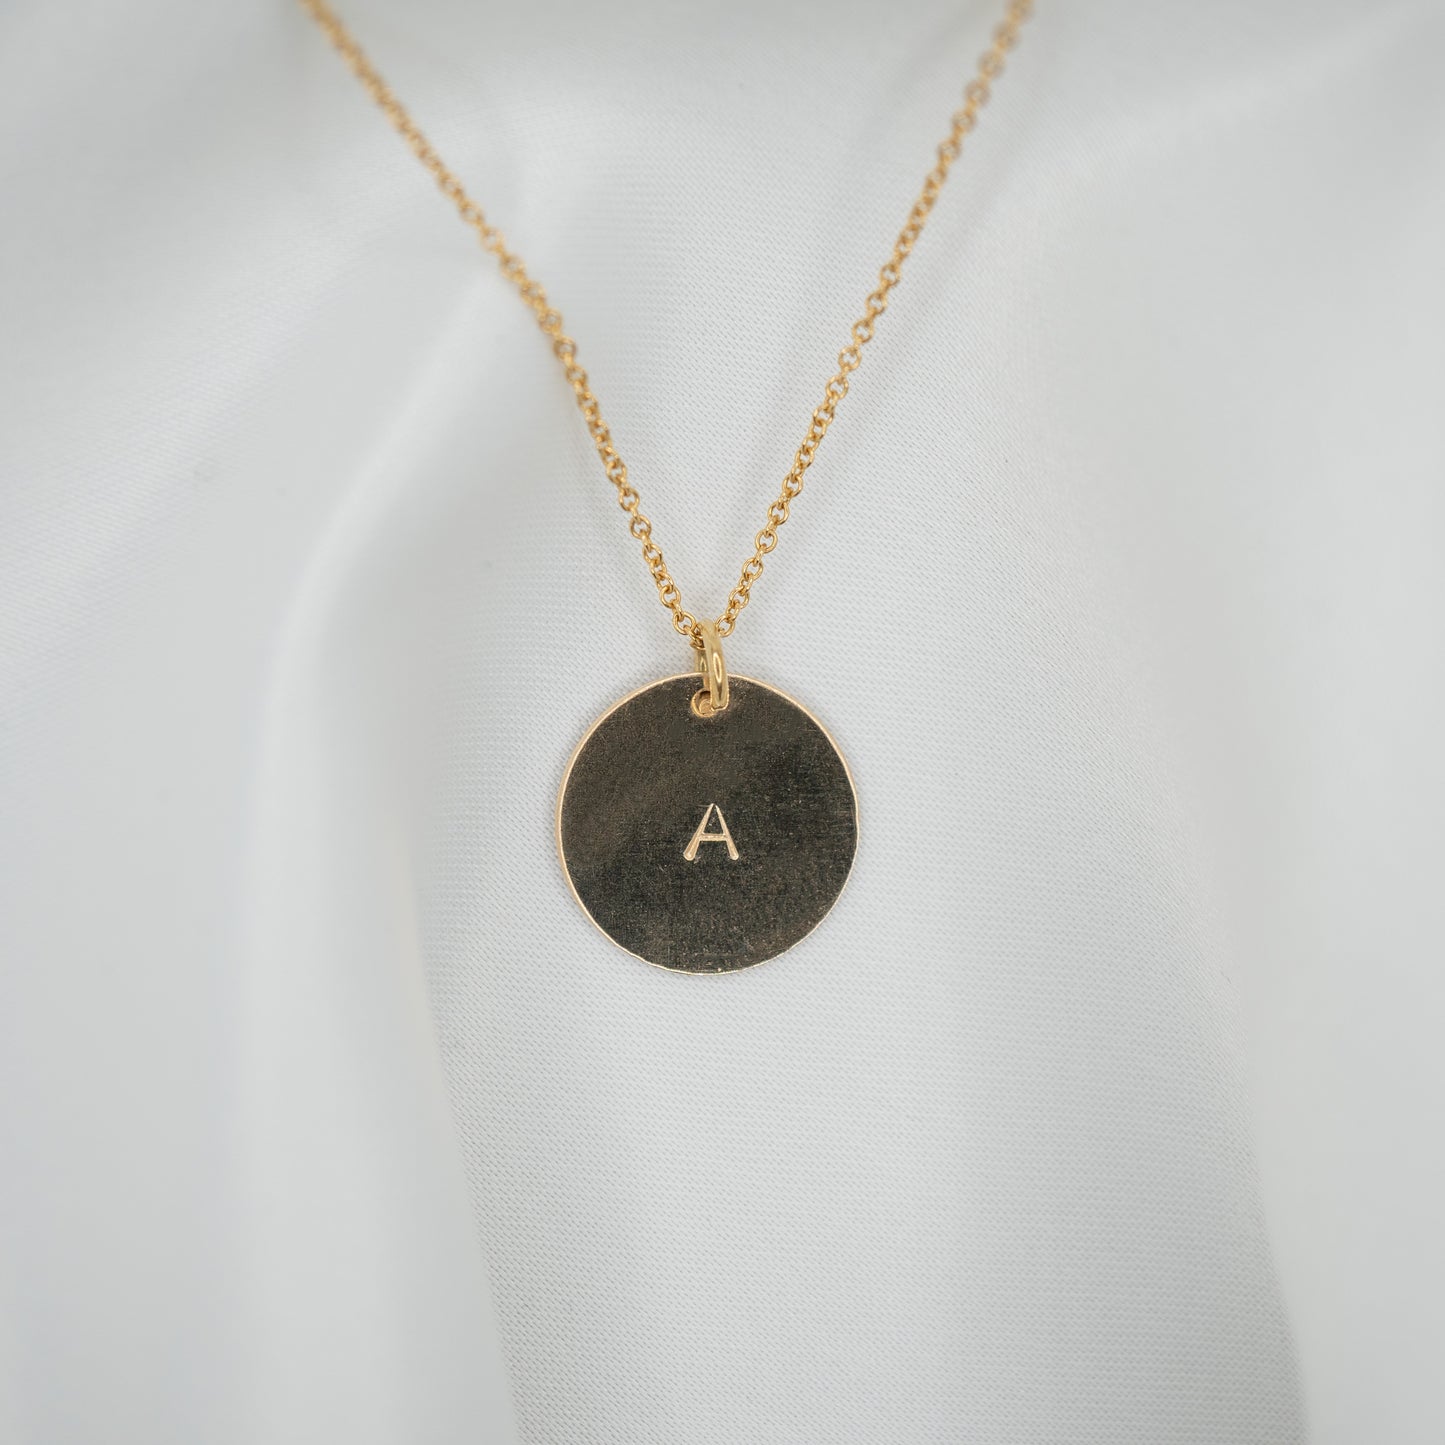 Gold Filled Hand Stamped Round Pendant and Necklace - Personalised Initial - shot on white